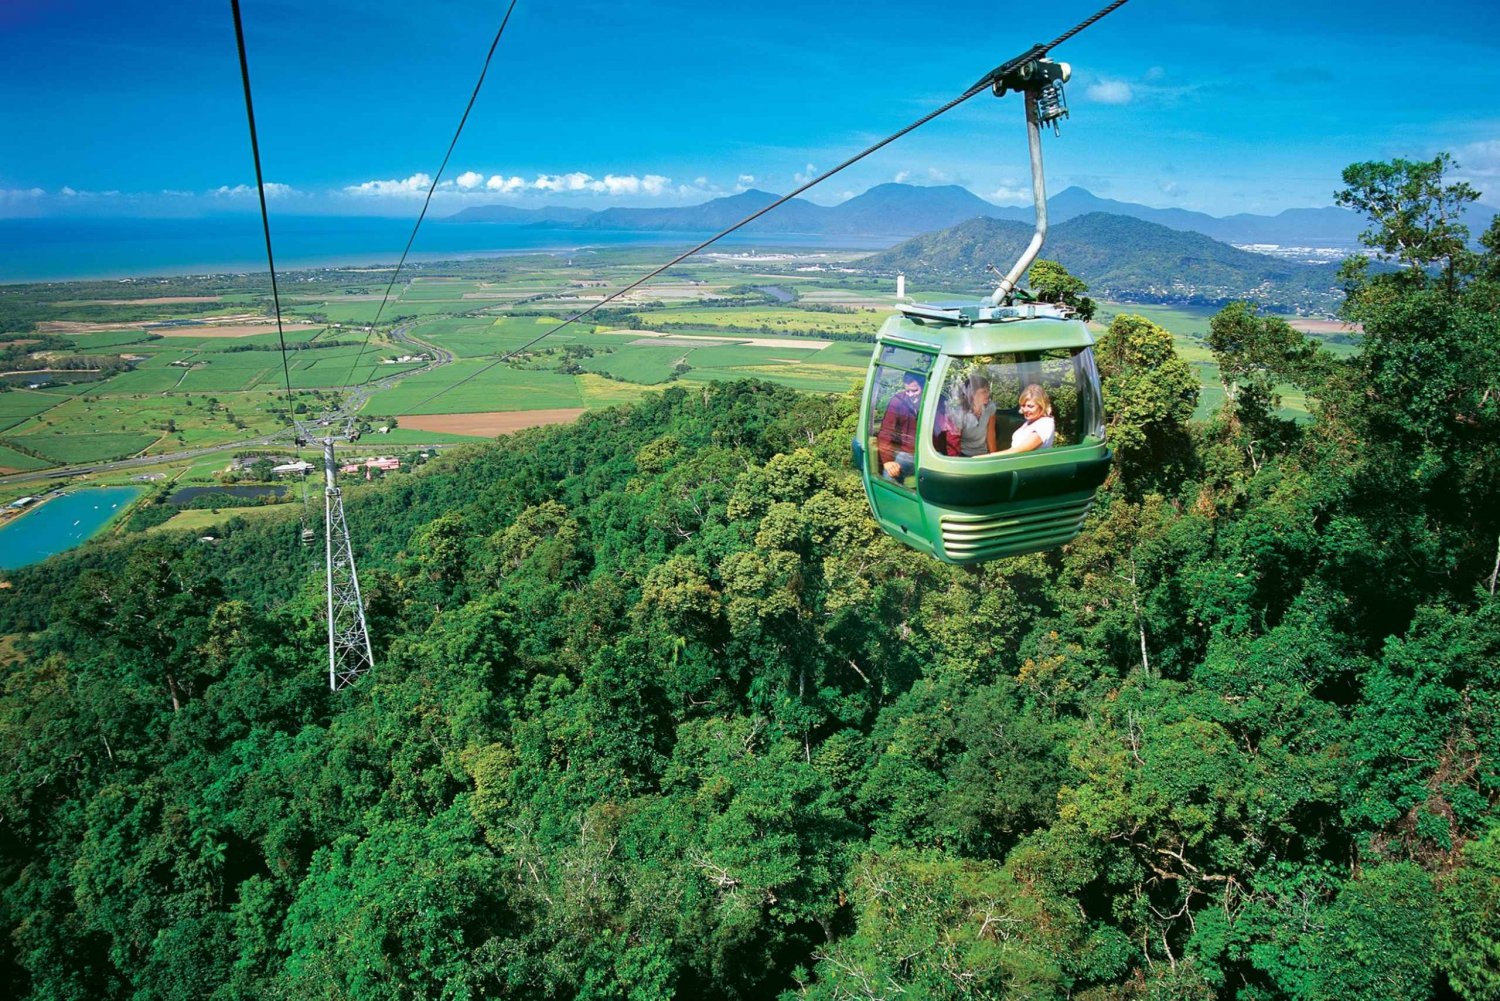 Cairns: Skyrail Cableway to Kuranda and Rail tickets